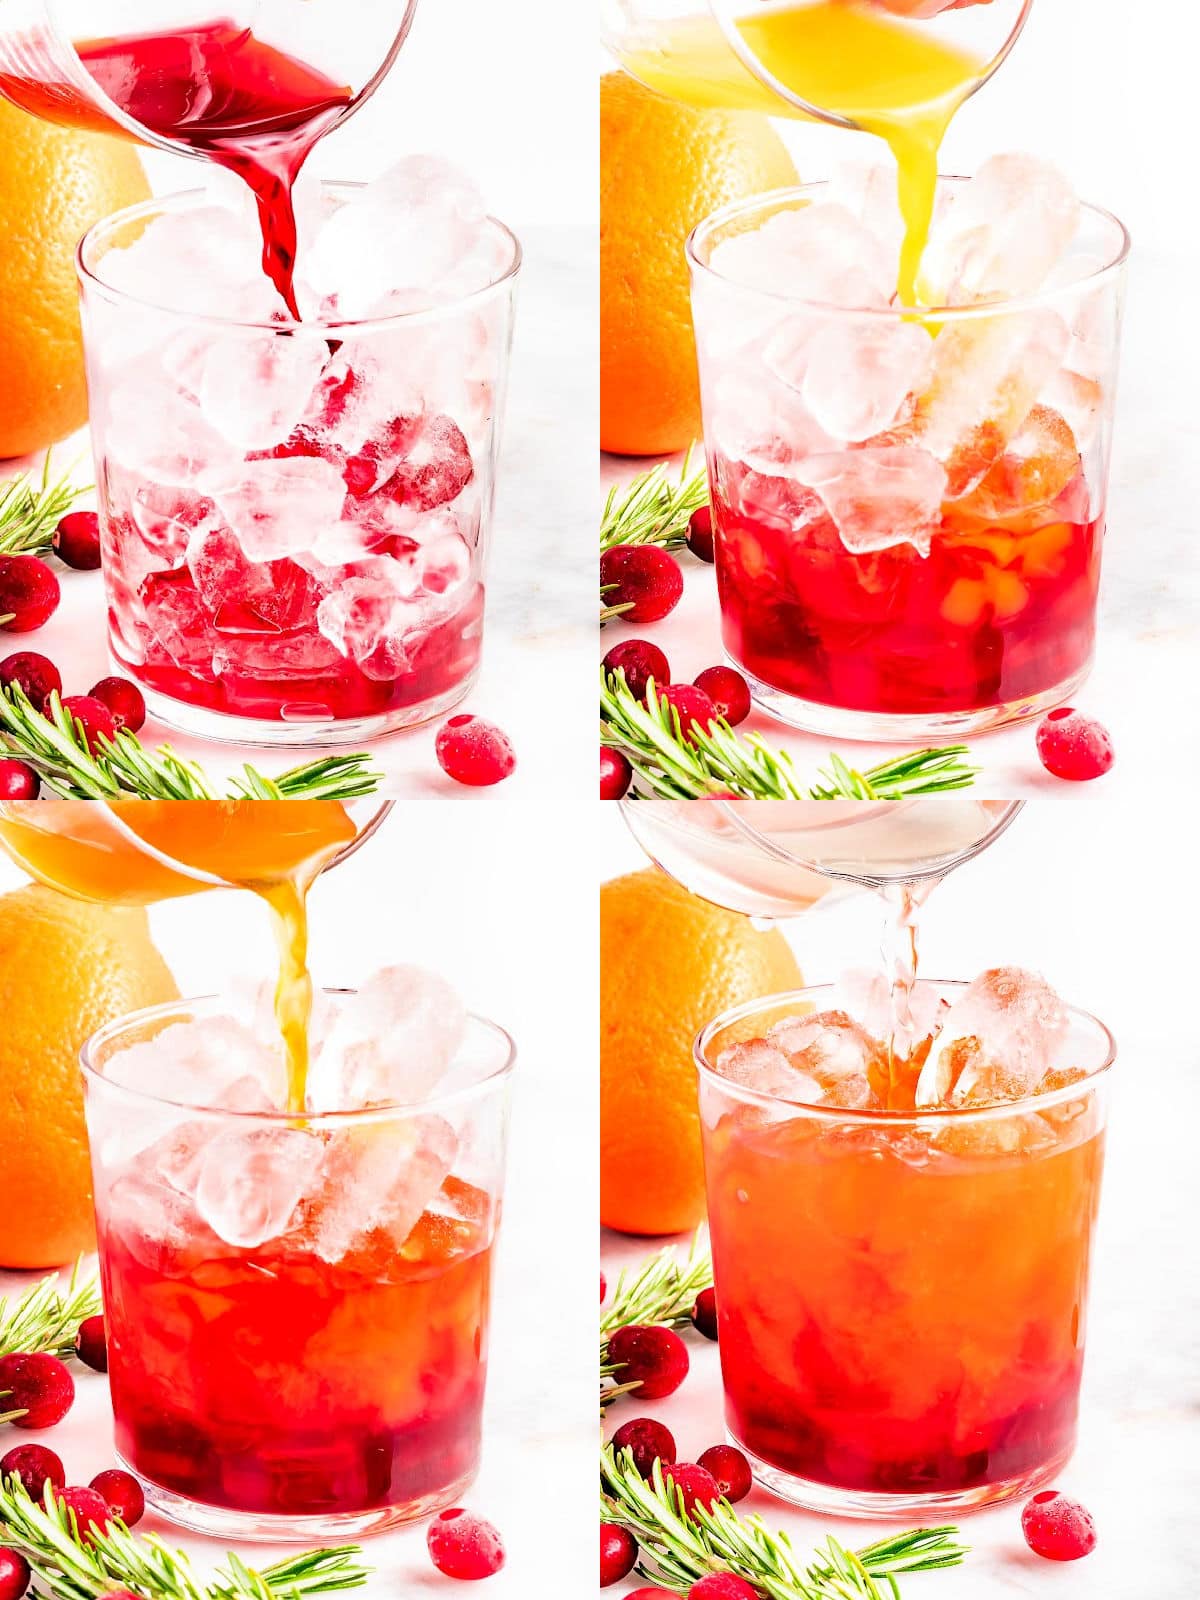 four image collage showing how to prepare this layered Christmas punch recipe.